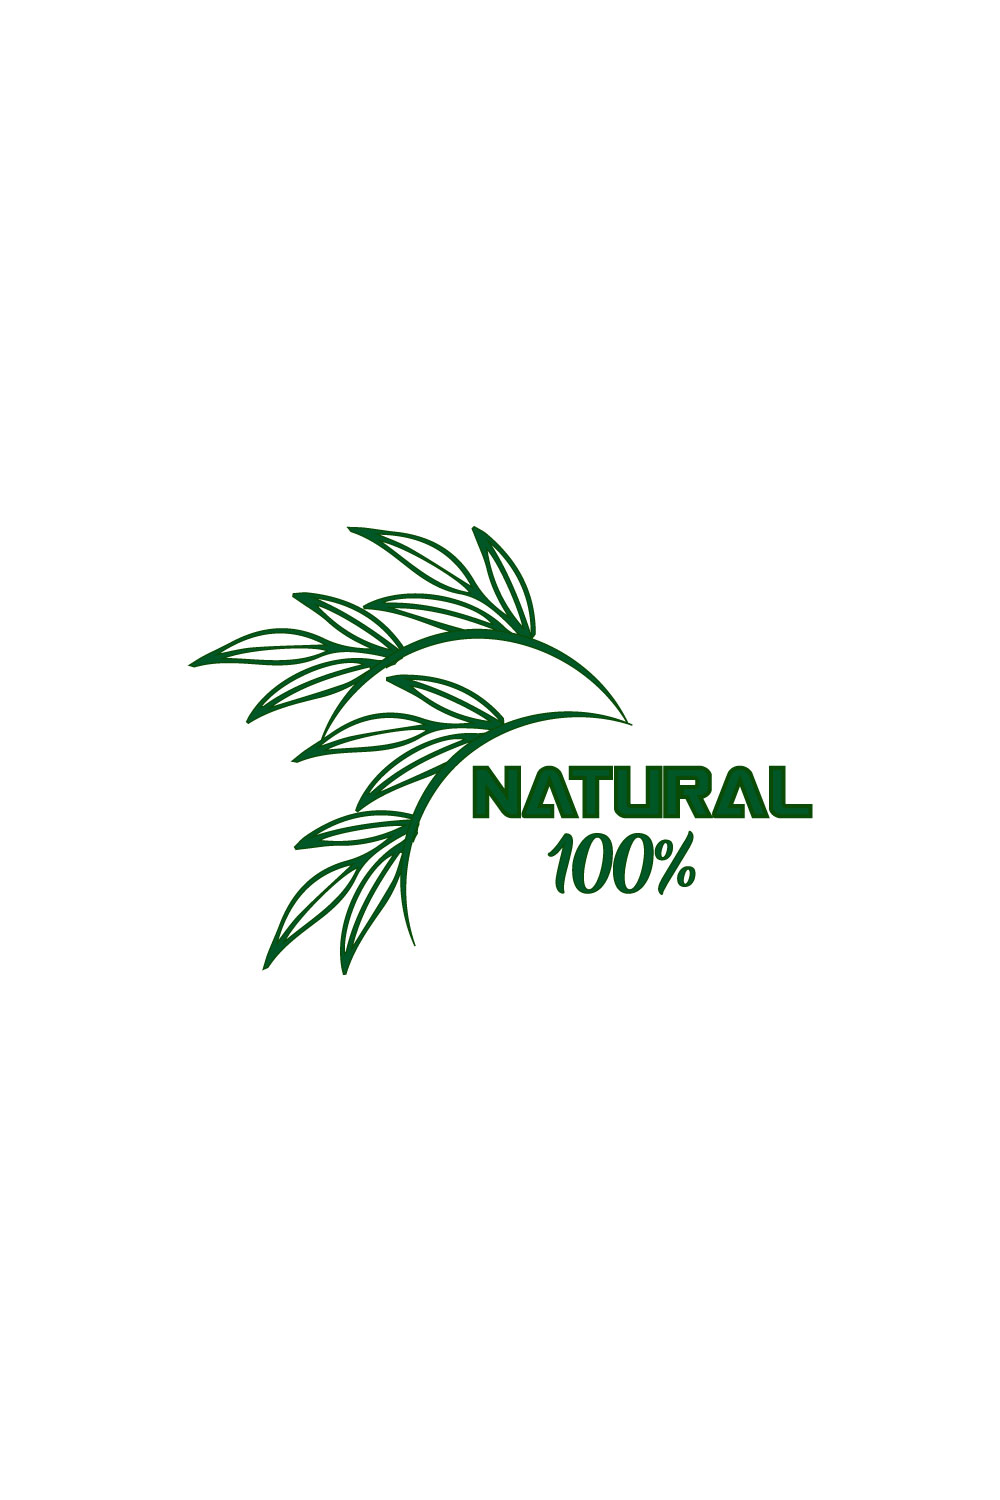 Free green food logo pinterest preview image.